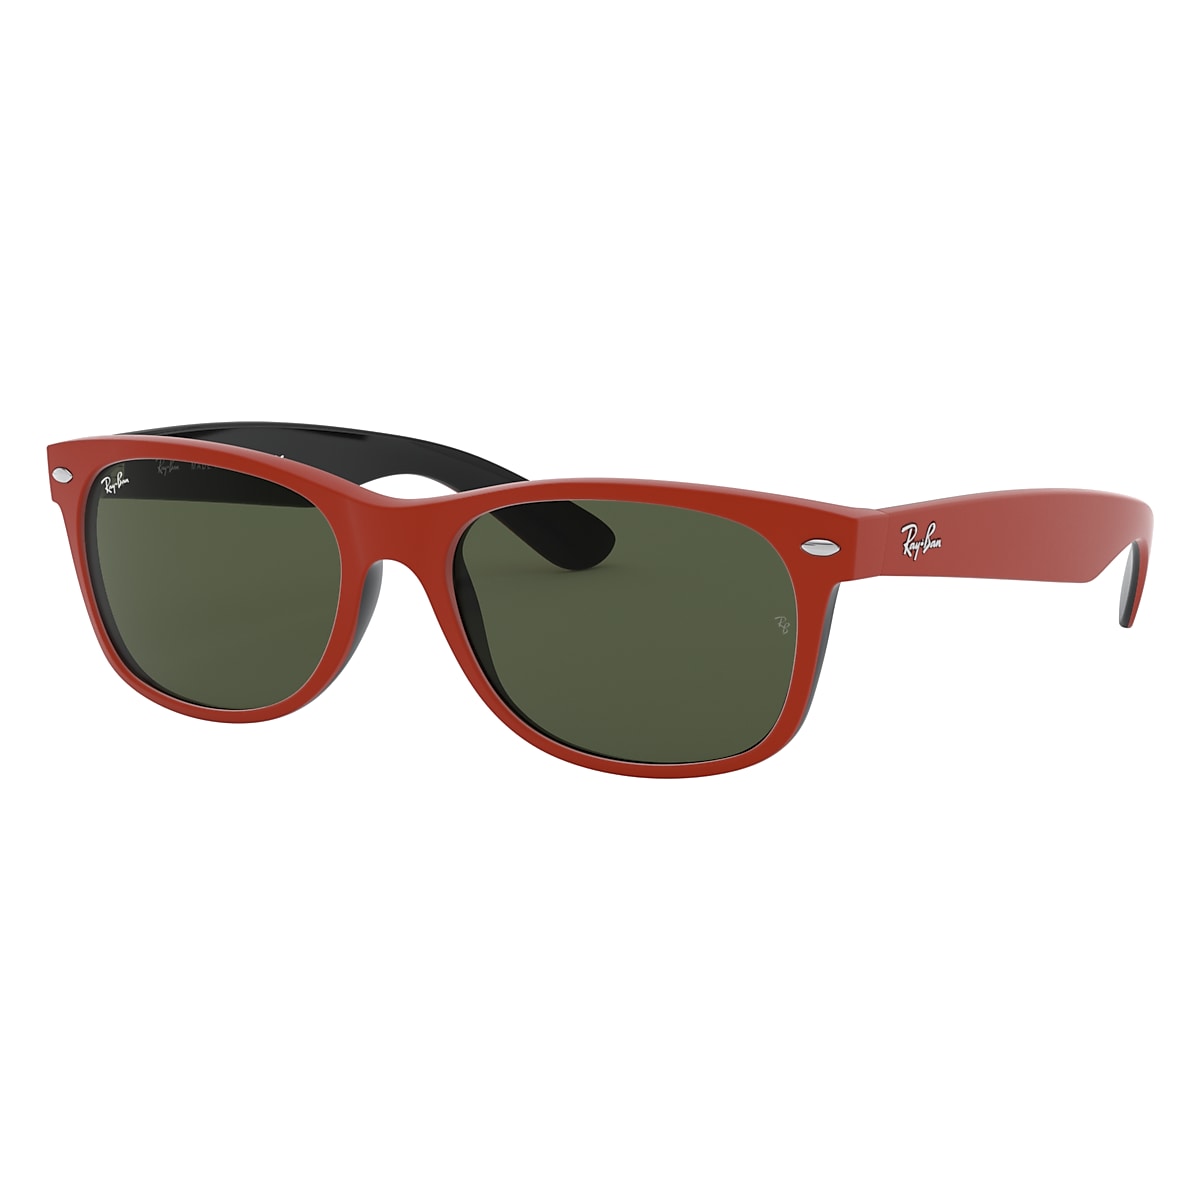 Top 54+ imagen red ray ban sunglasses